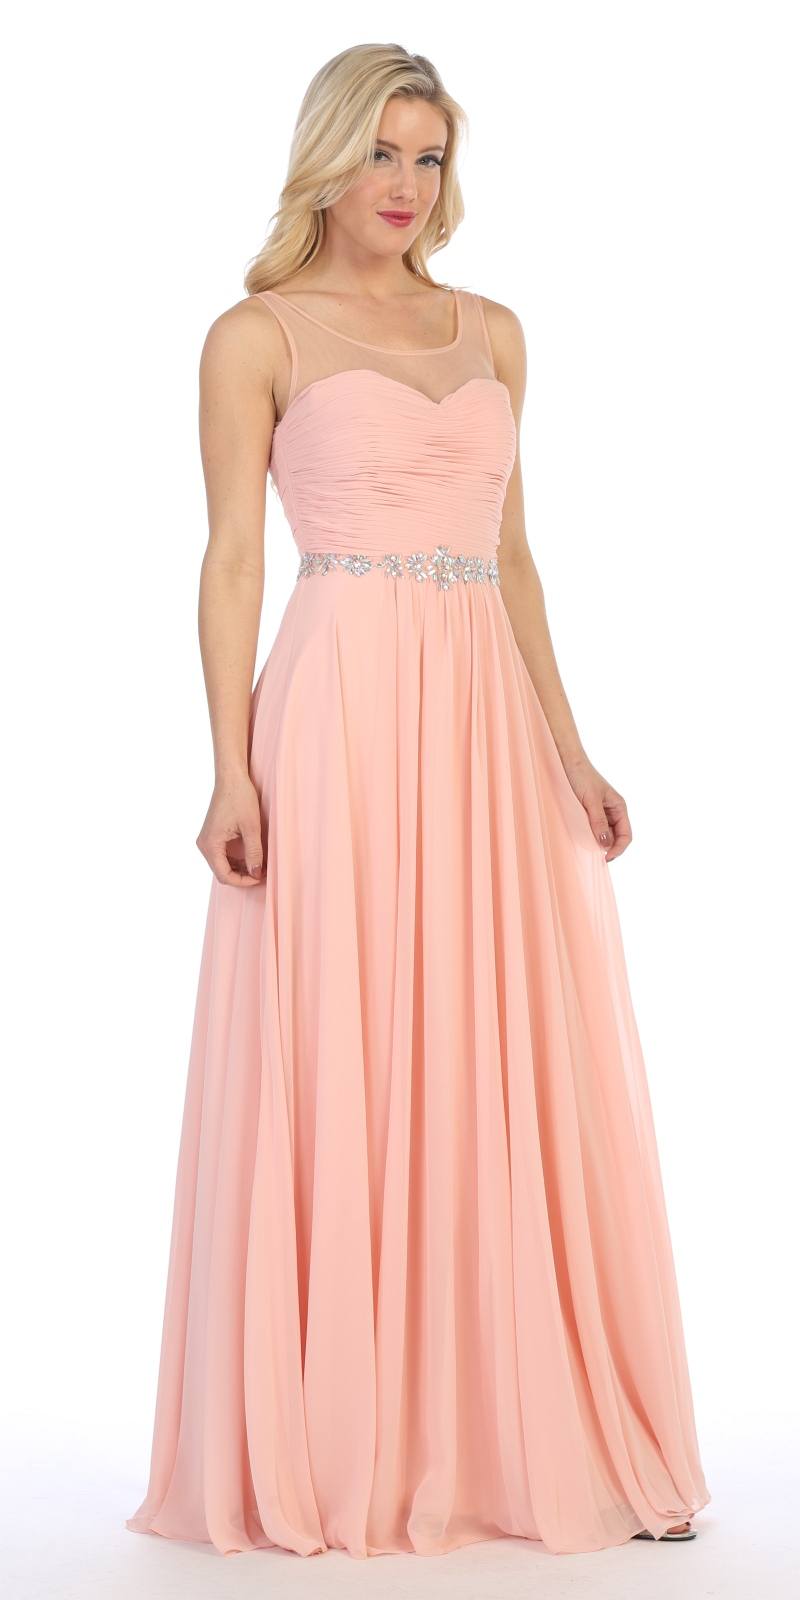 Celavie 5020 Blush Illusion Ruched Bodice Long Formal Dress Sleeveless Side View